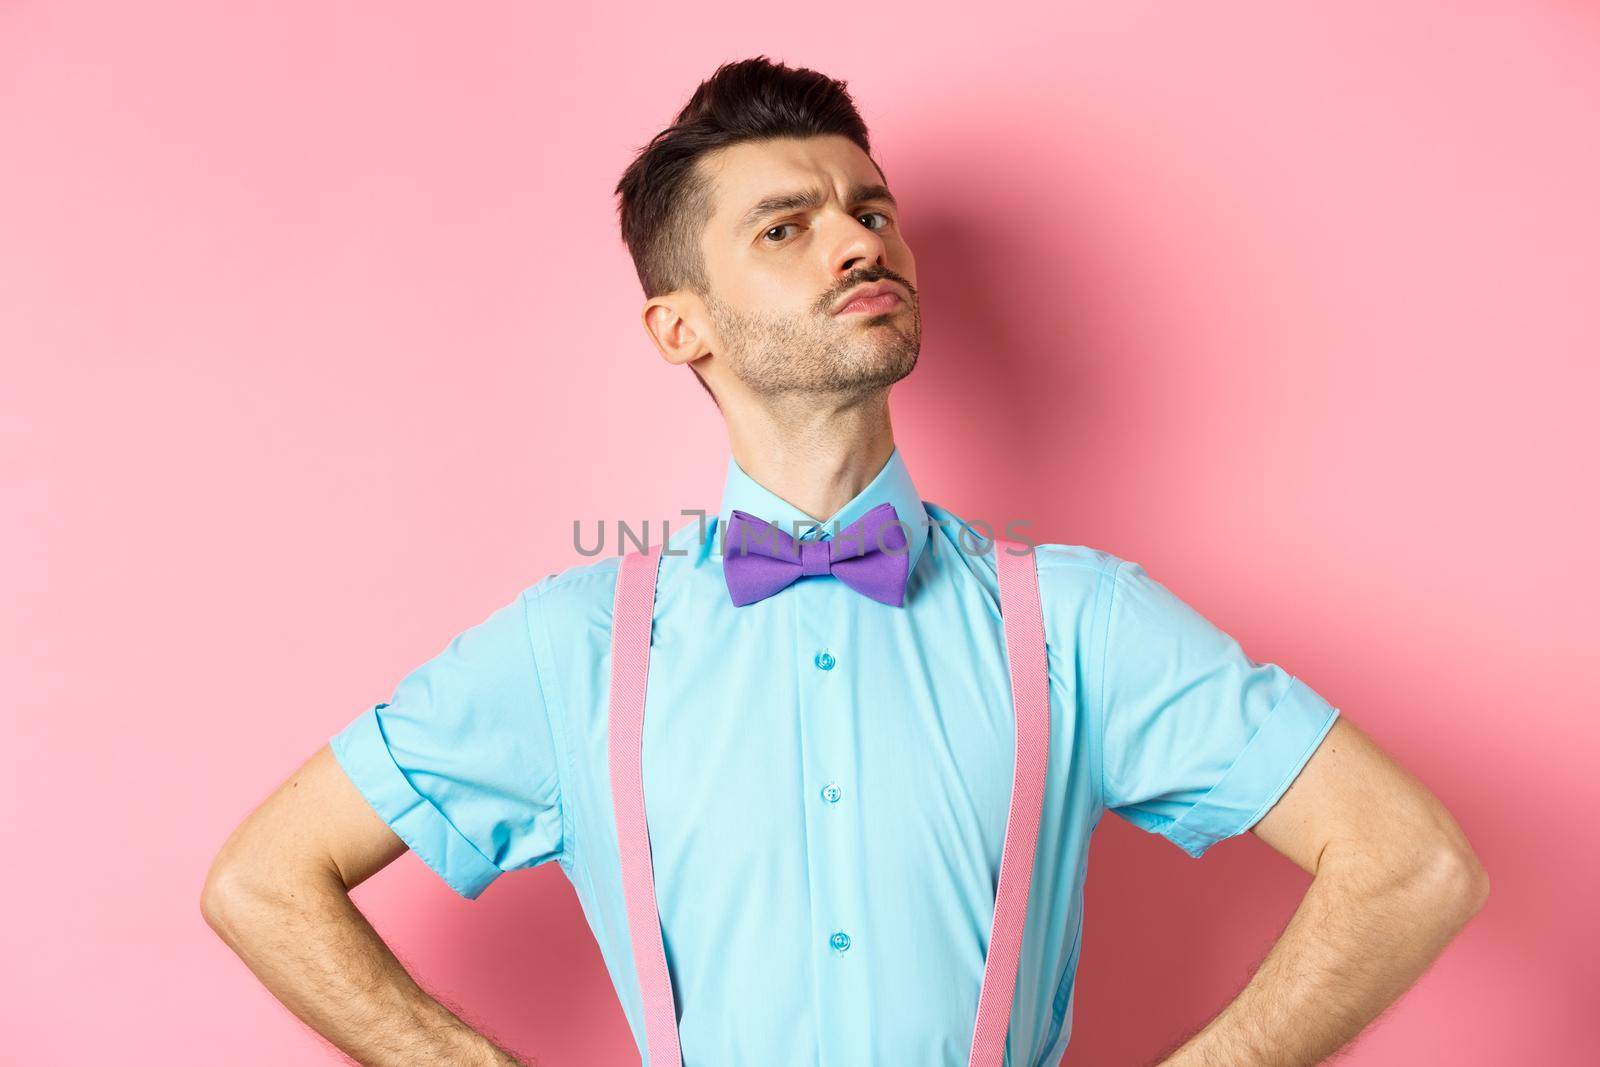 Proud and confident caucasian guy with moustache and bow-tie, looking arrogant with chin up, frowning and looking at camera, standing on pink background.